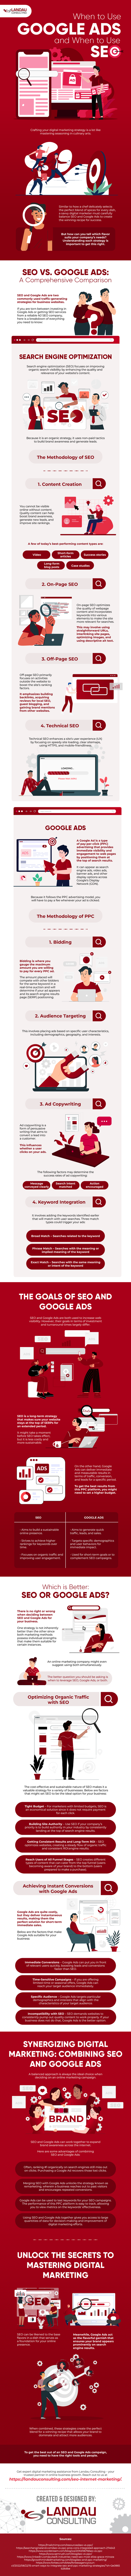 When-to-Use-Google-Ads-and-When-to-Use-SEO-Infographic-Image